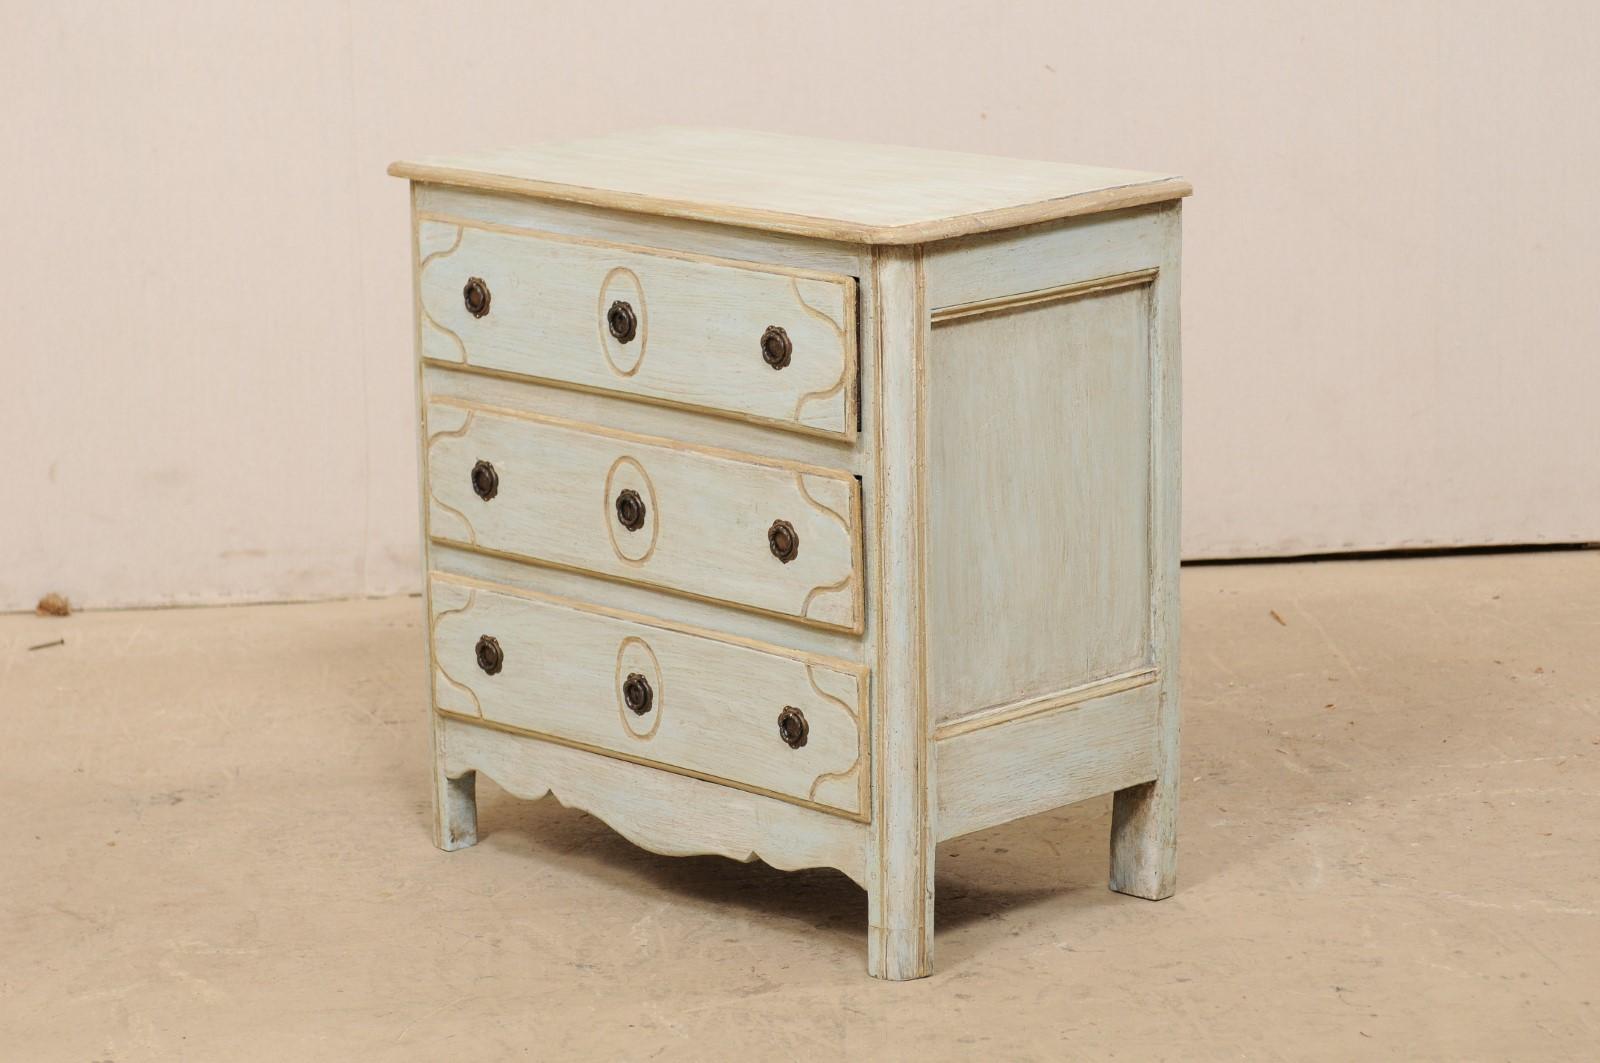 Wood French Petite-Sized Commode in Pale Blue from the Turn of the 18th & 19th C.